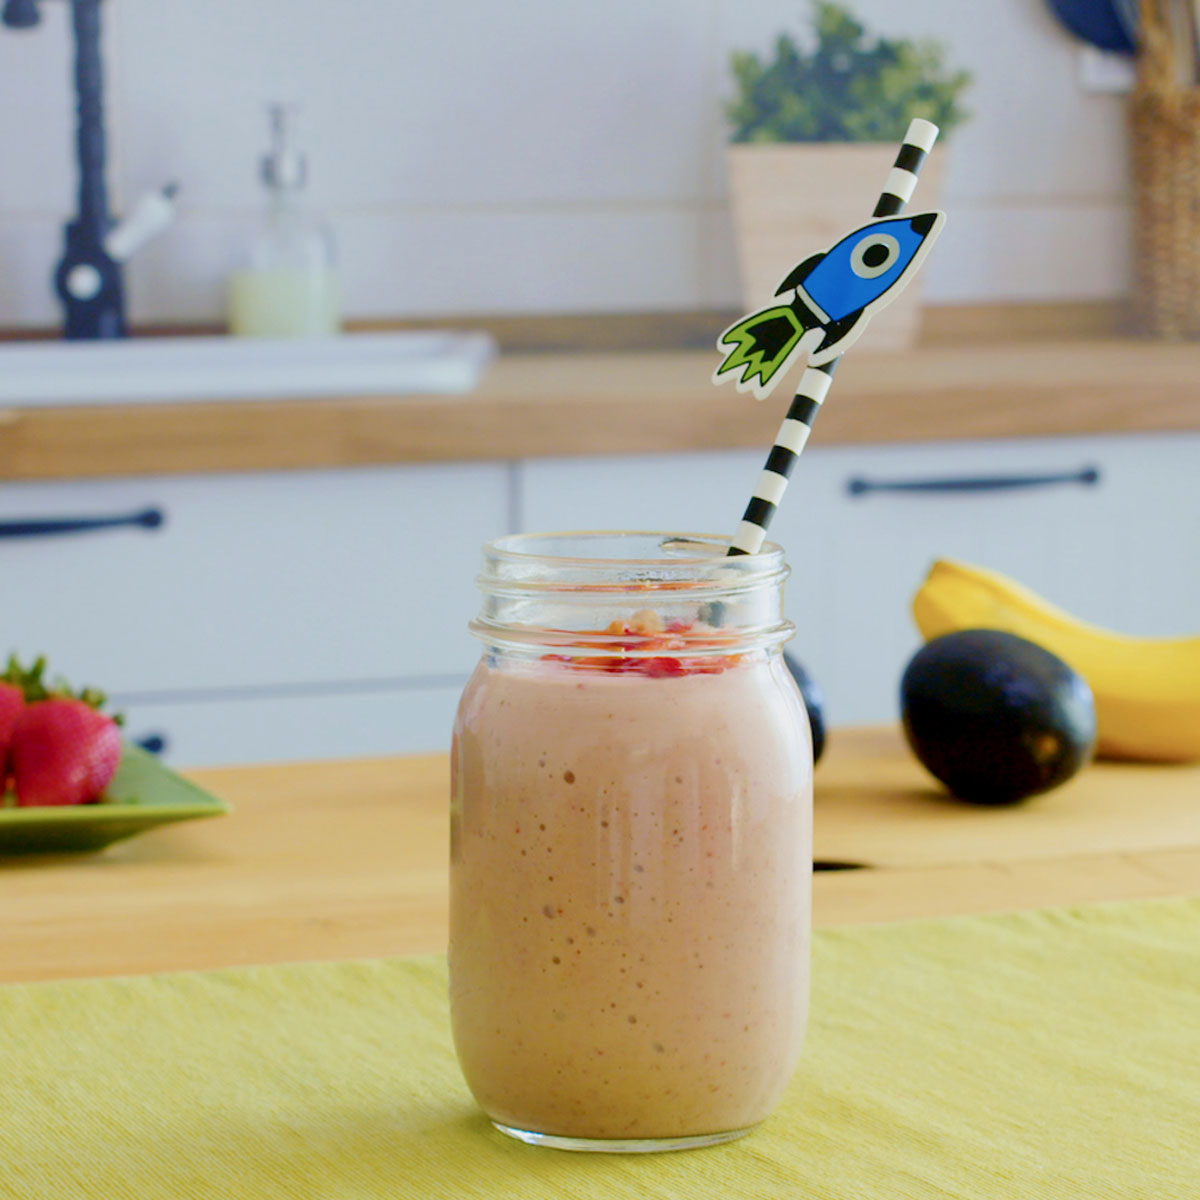 peanut butter and jelly smoothie with fun straw on a counter with banana, strawberries and avocado